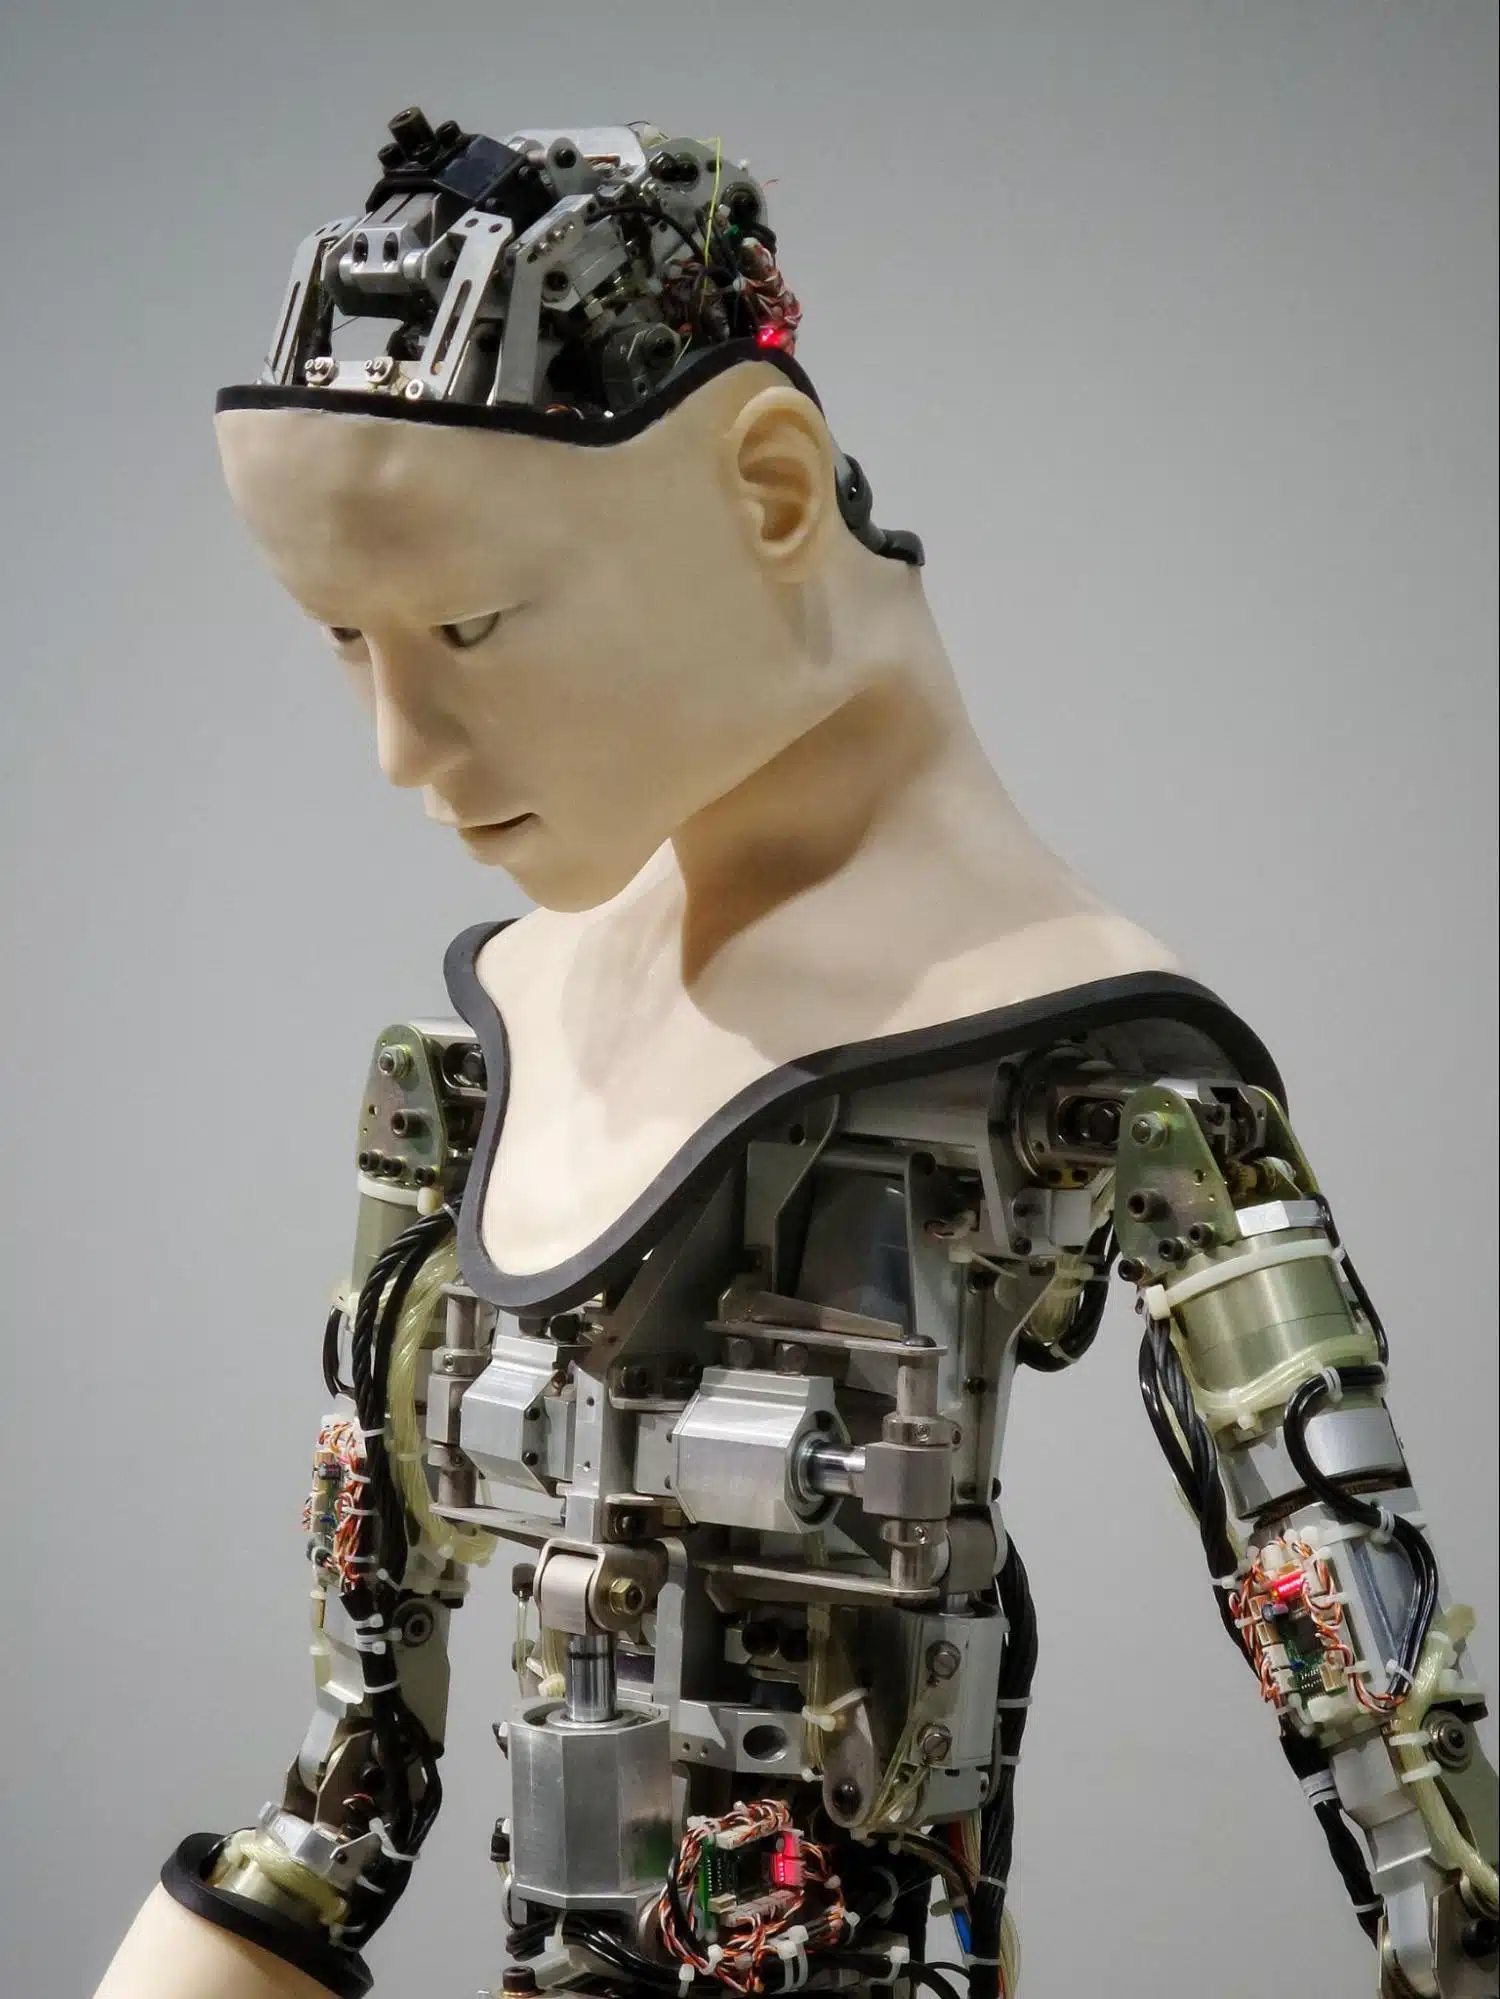 Robot model with human-like face